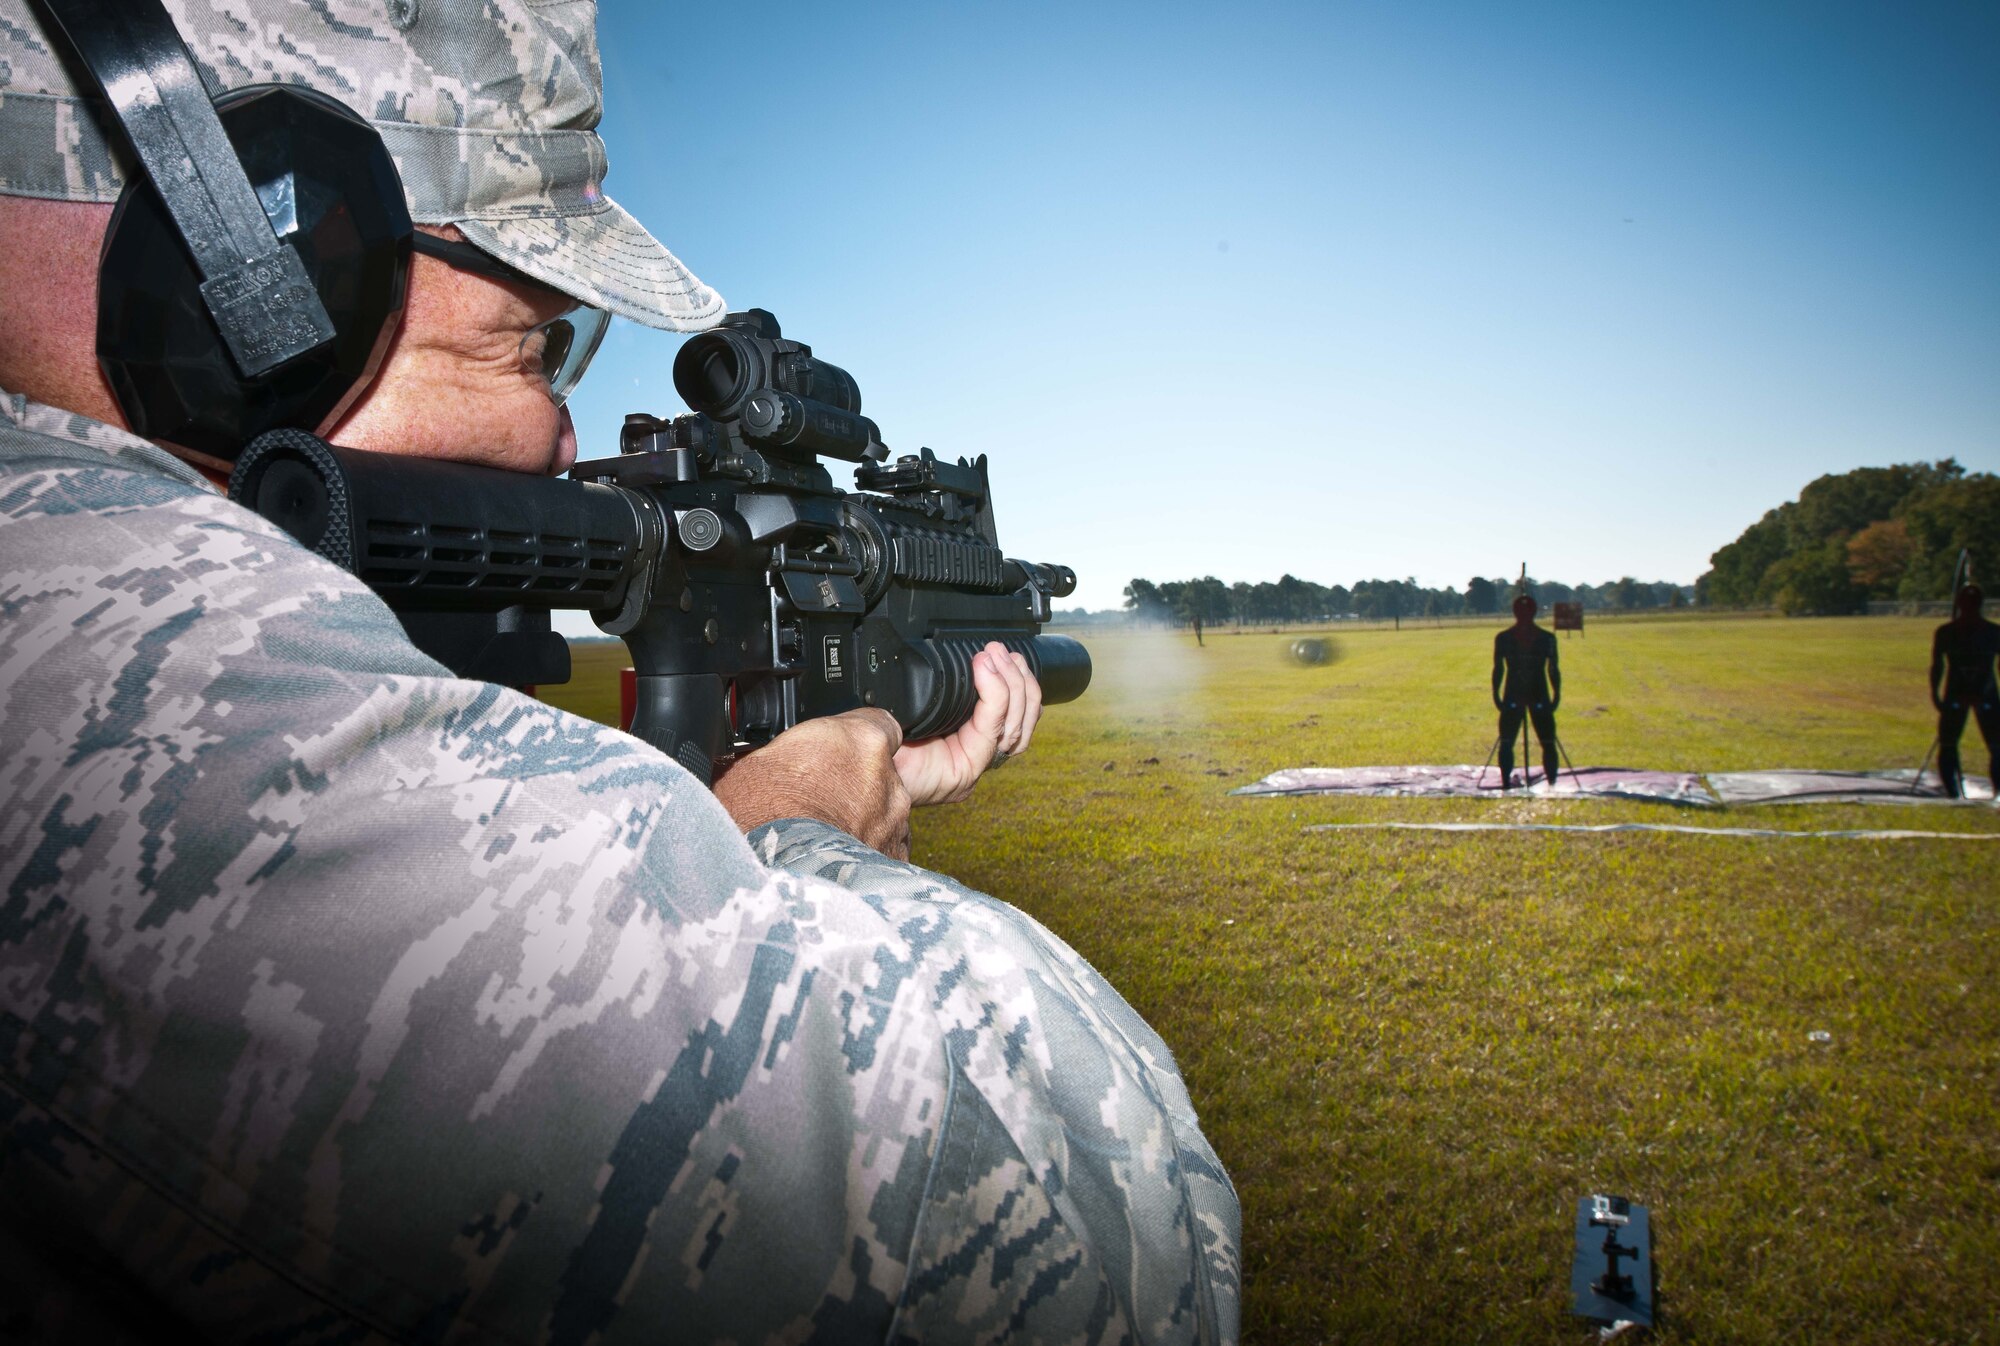 Lt. Col. Robert Waarik, Air War College student, practices shooting non-lethal ammunition at a target during a Non-lethal Weapons and Effects class at Maxwell Air Force Base, Alabama, Oct. 23, 2014. The use of non-lethal weapons gives military members more options when defending themselves and others. (U.S. Air Force photo by Donna L. Burnett)